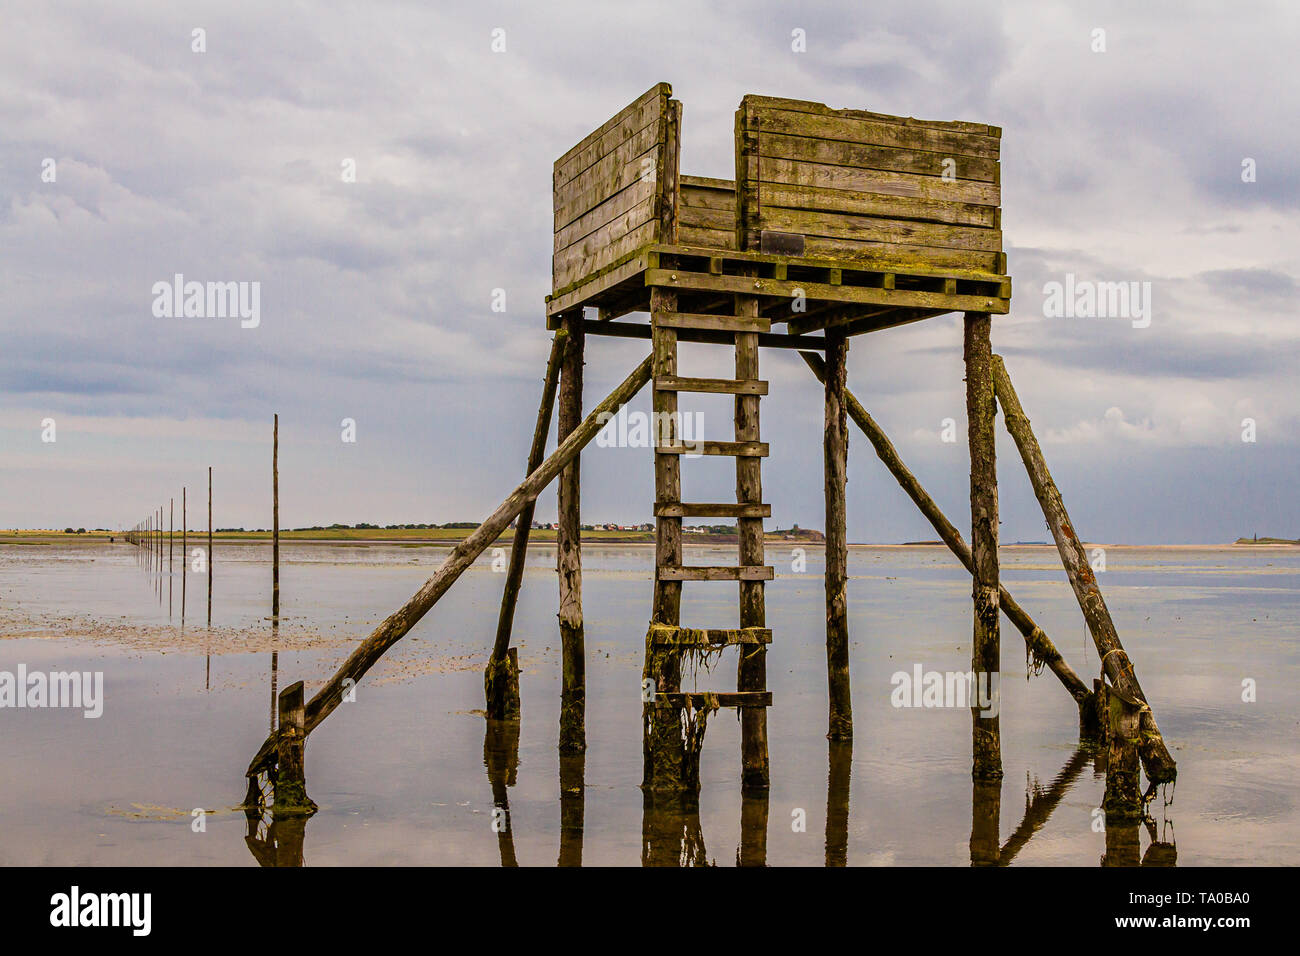 A refuge box for walkers caught out by the tide on the Pilgrims' Way, Holy Island of Lindisfarne, Northumberland, UK. July 2018. Stock Photo